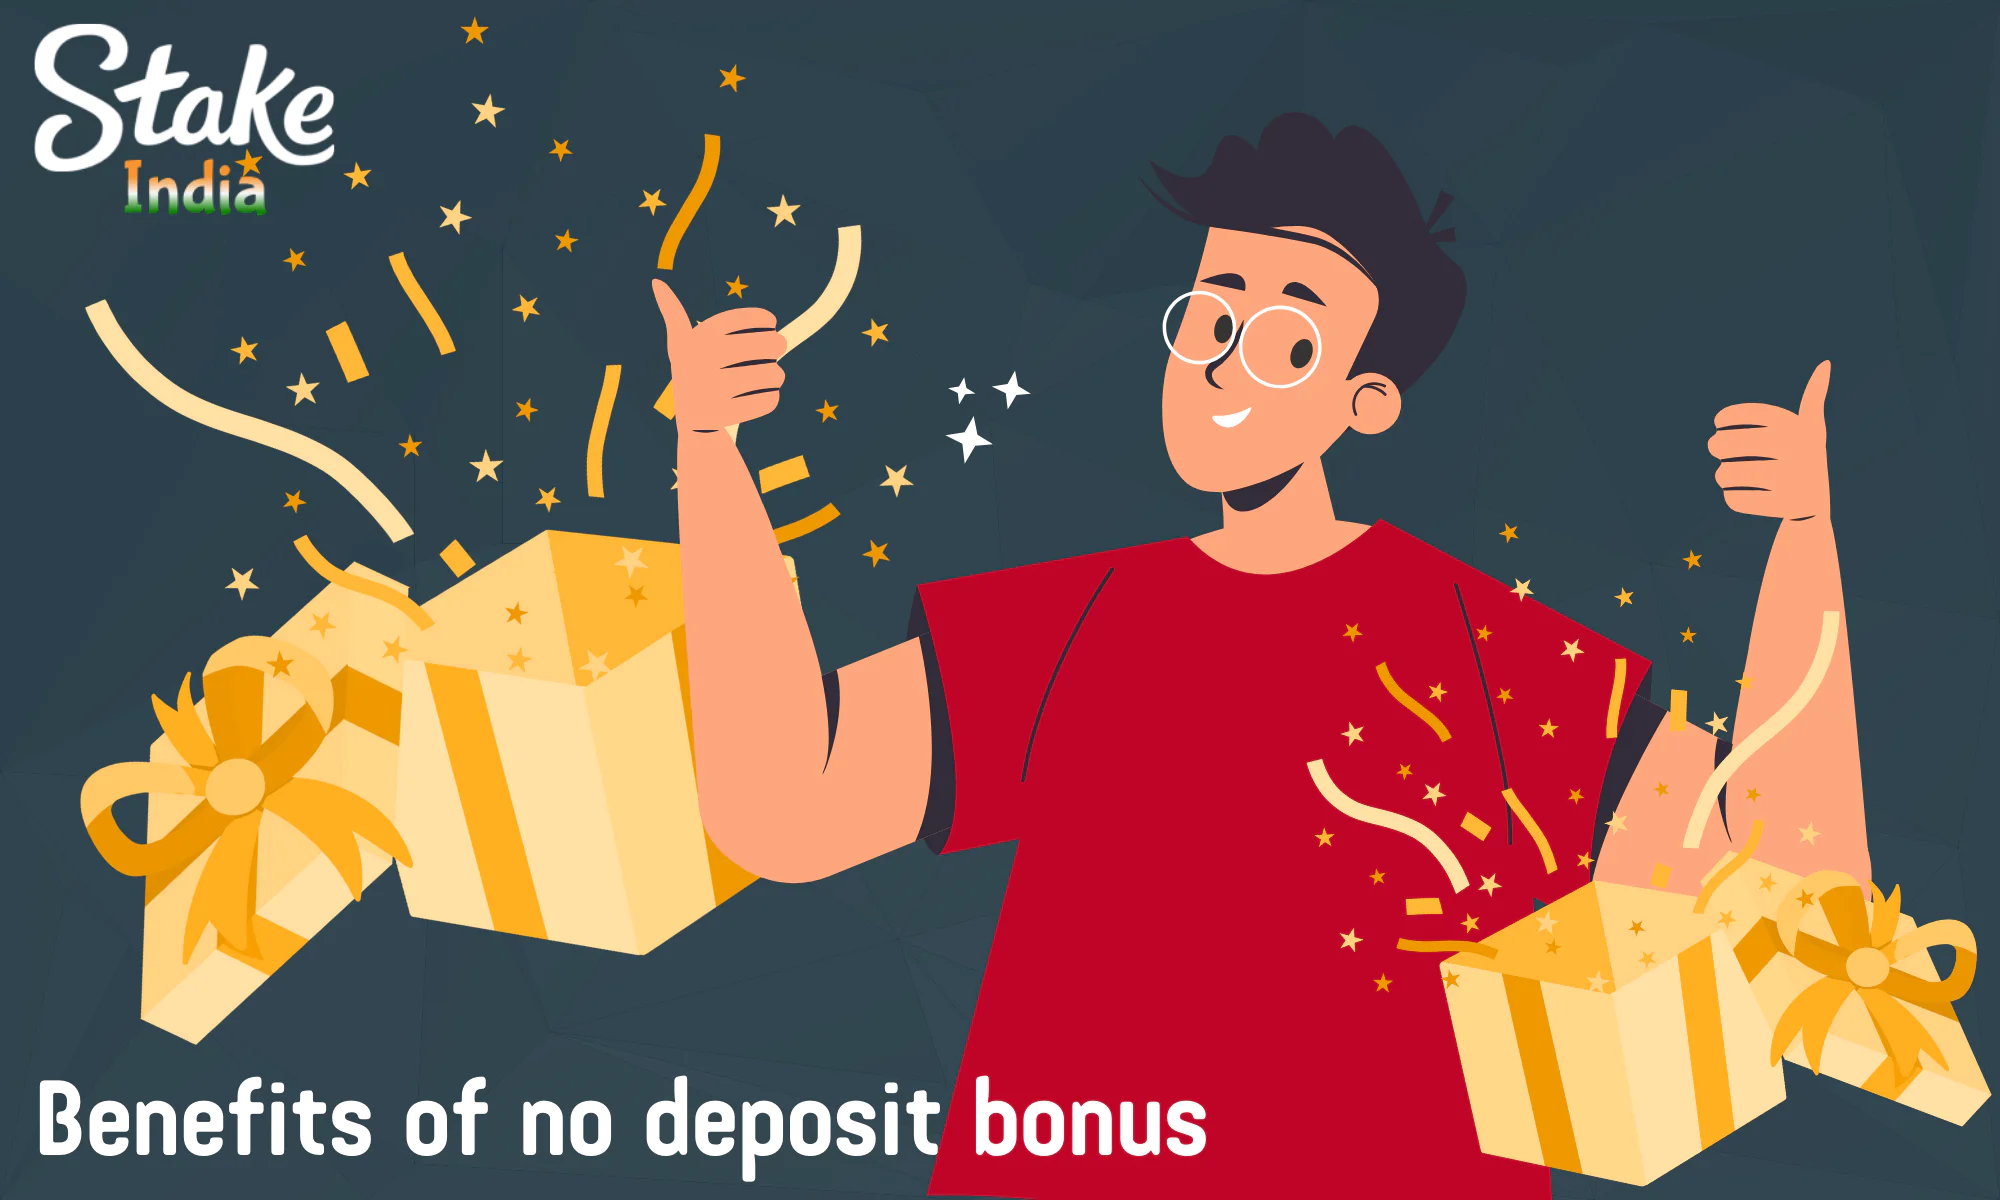 A few advantages offered by Stake with no deposit bonuses for players from India